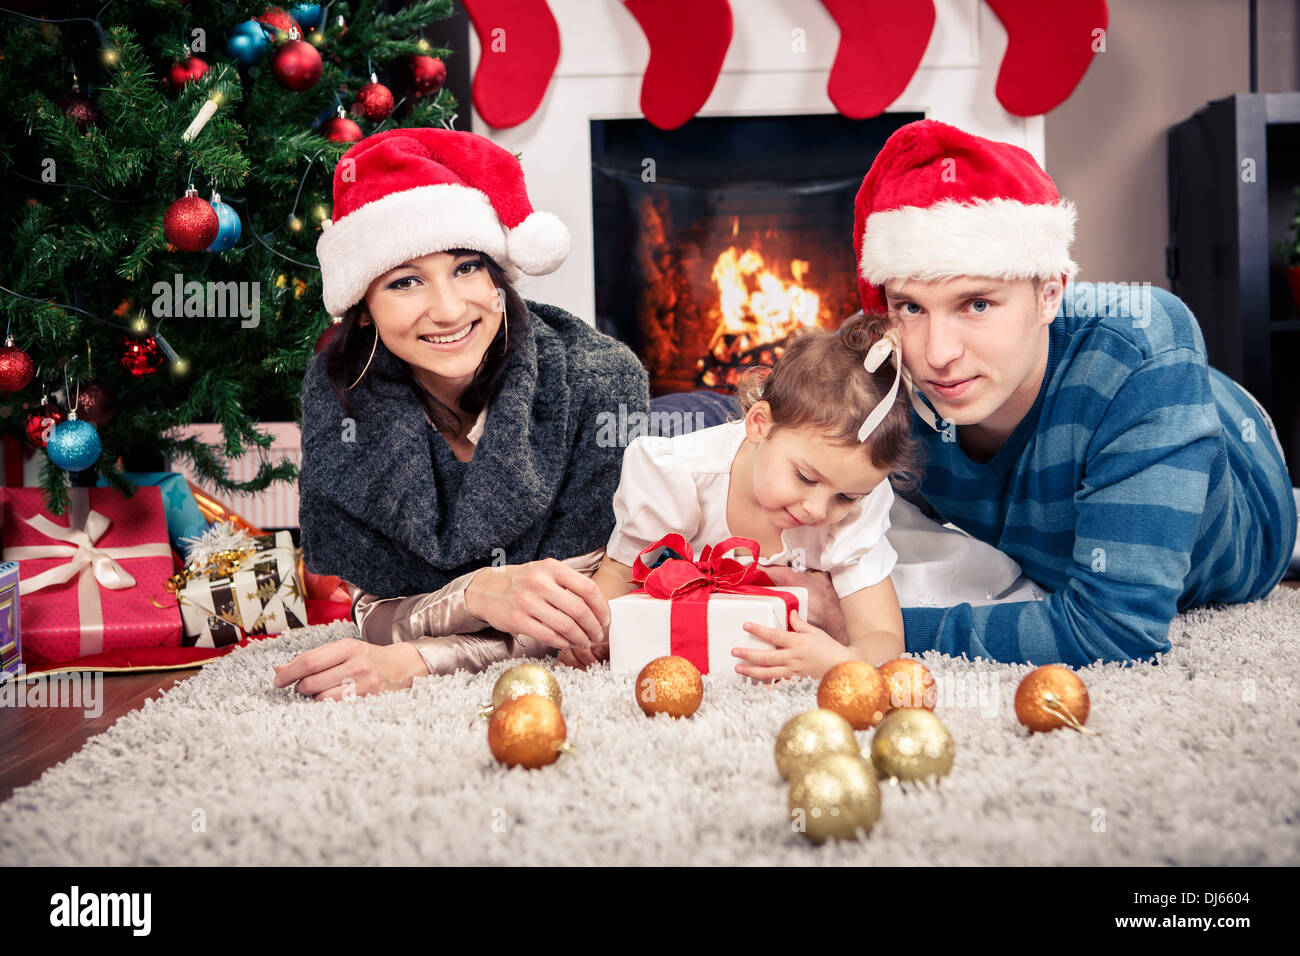 young family in front of christmas tree Stock Photo